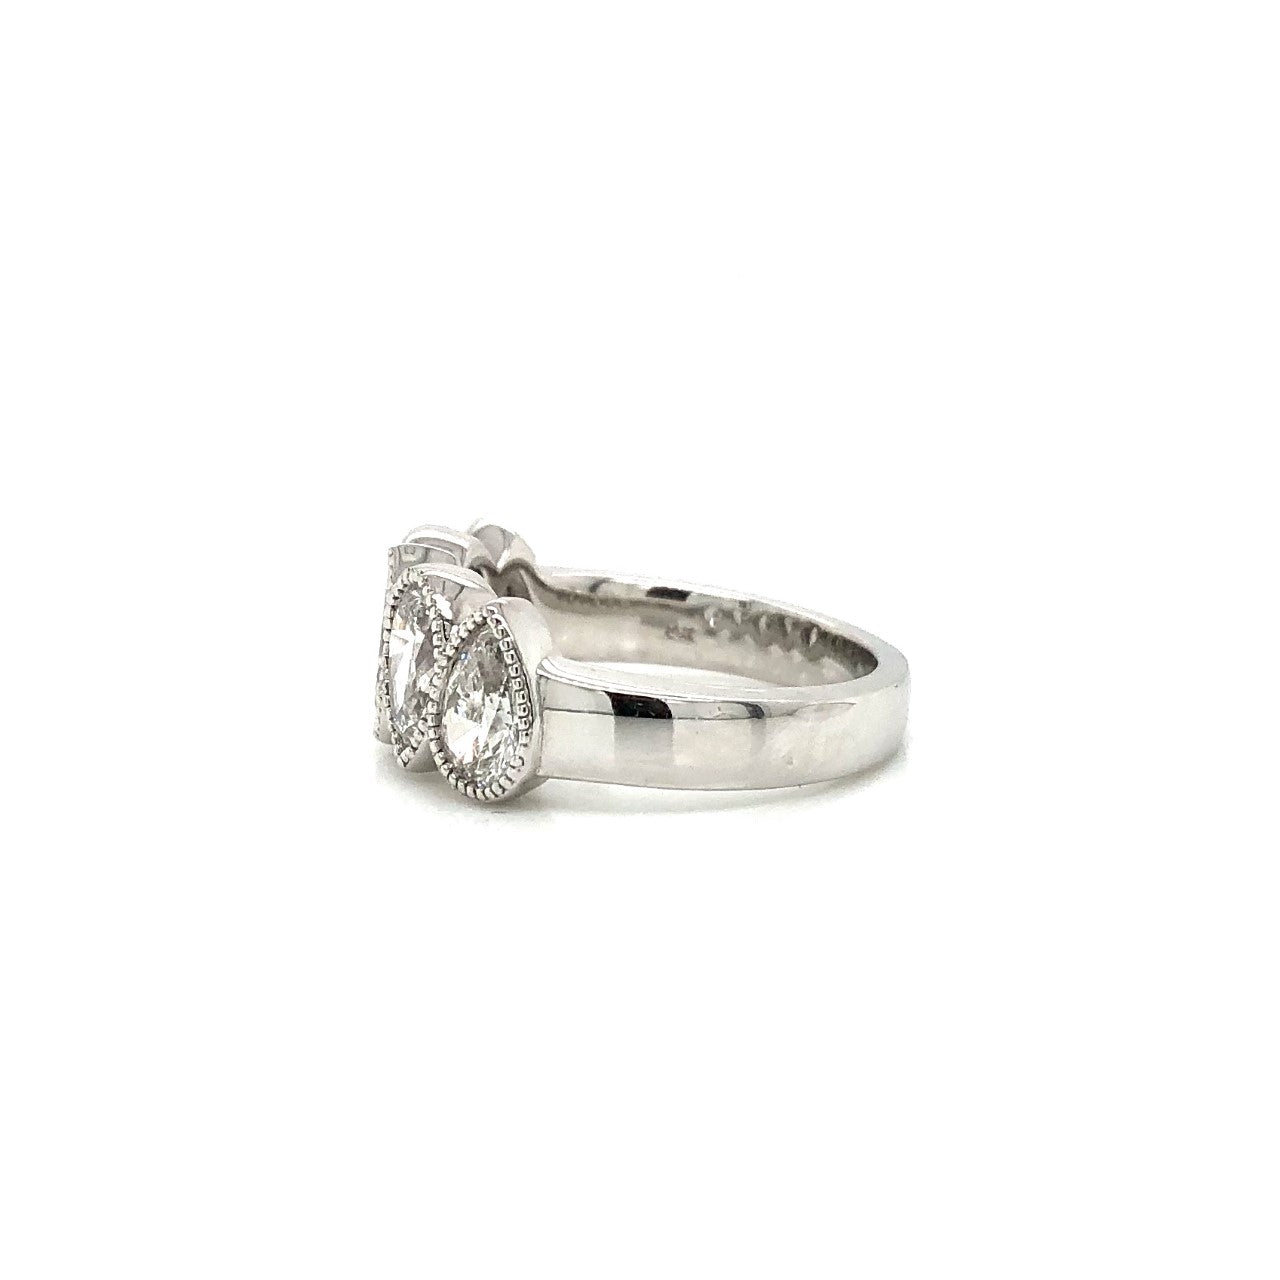 14KW 5 Pear Shaped Diamond Anniversary Ring In White Gold